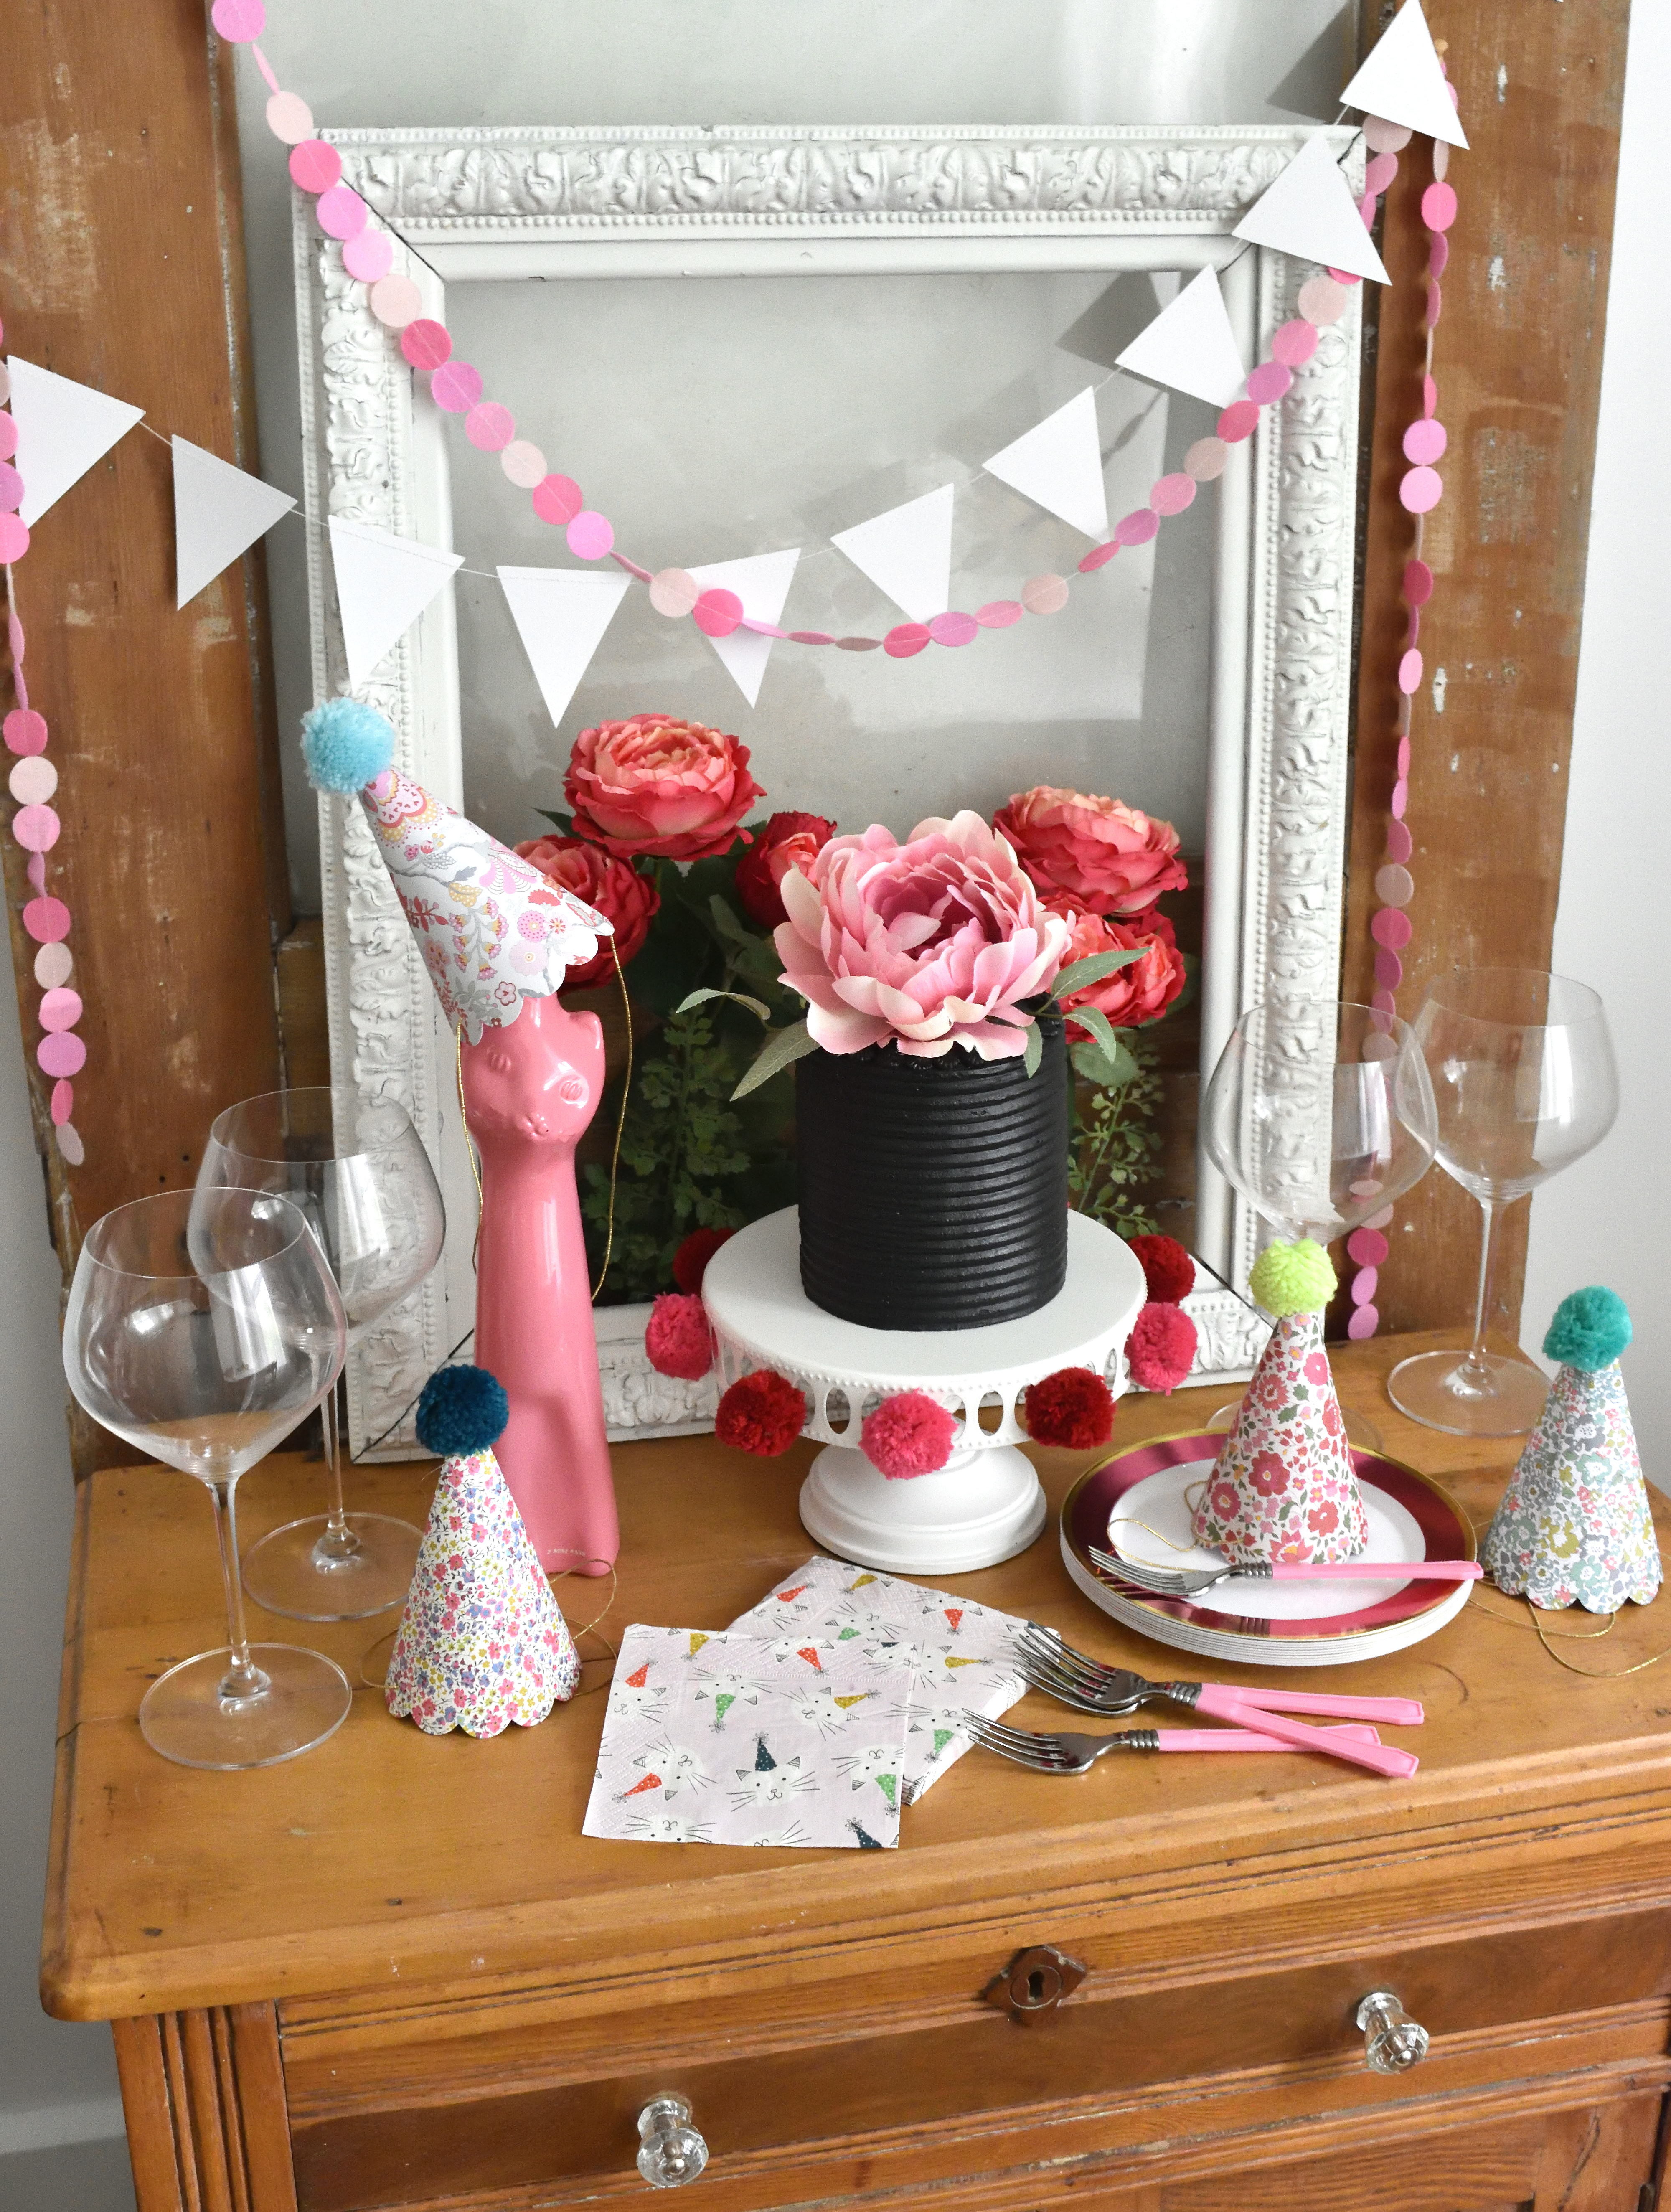 grownup birthday party ideas and decor